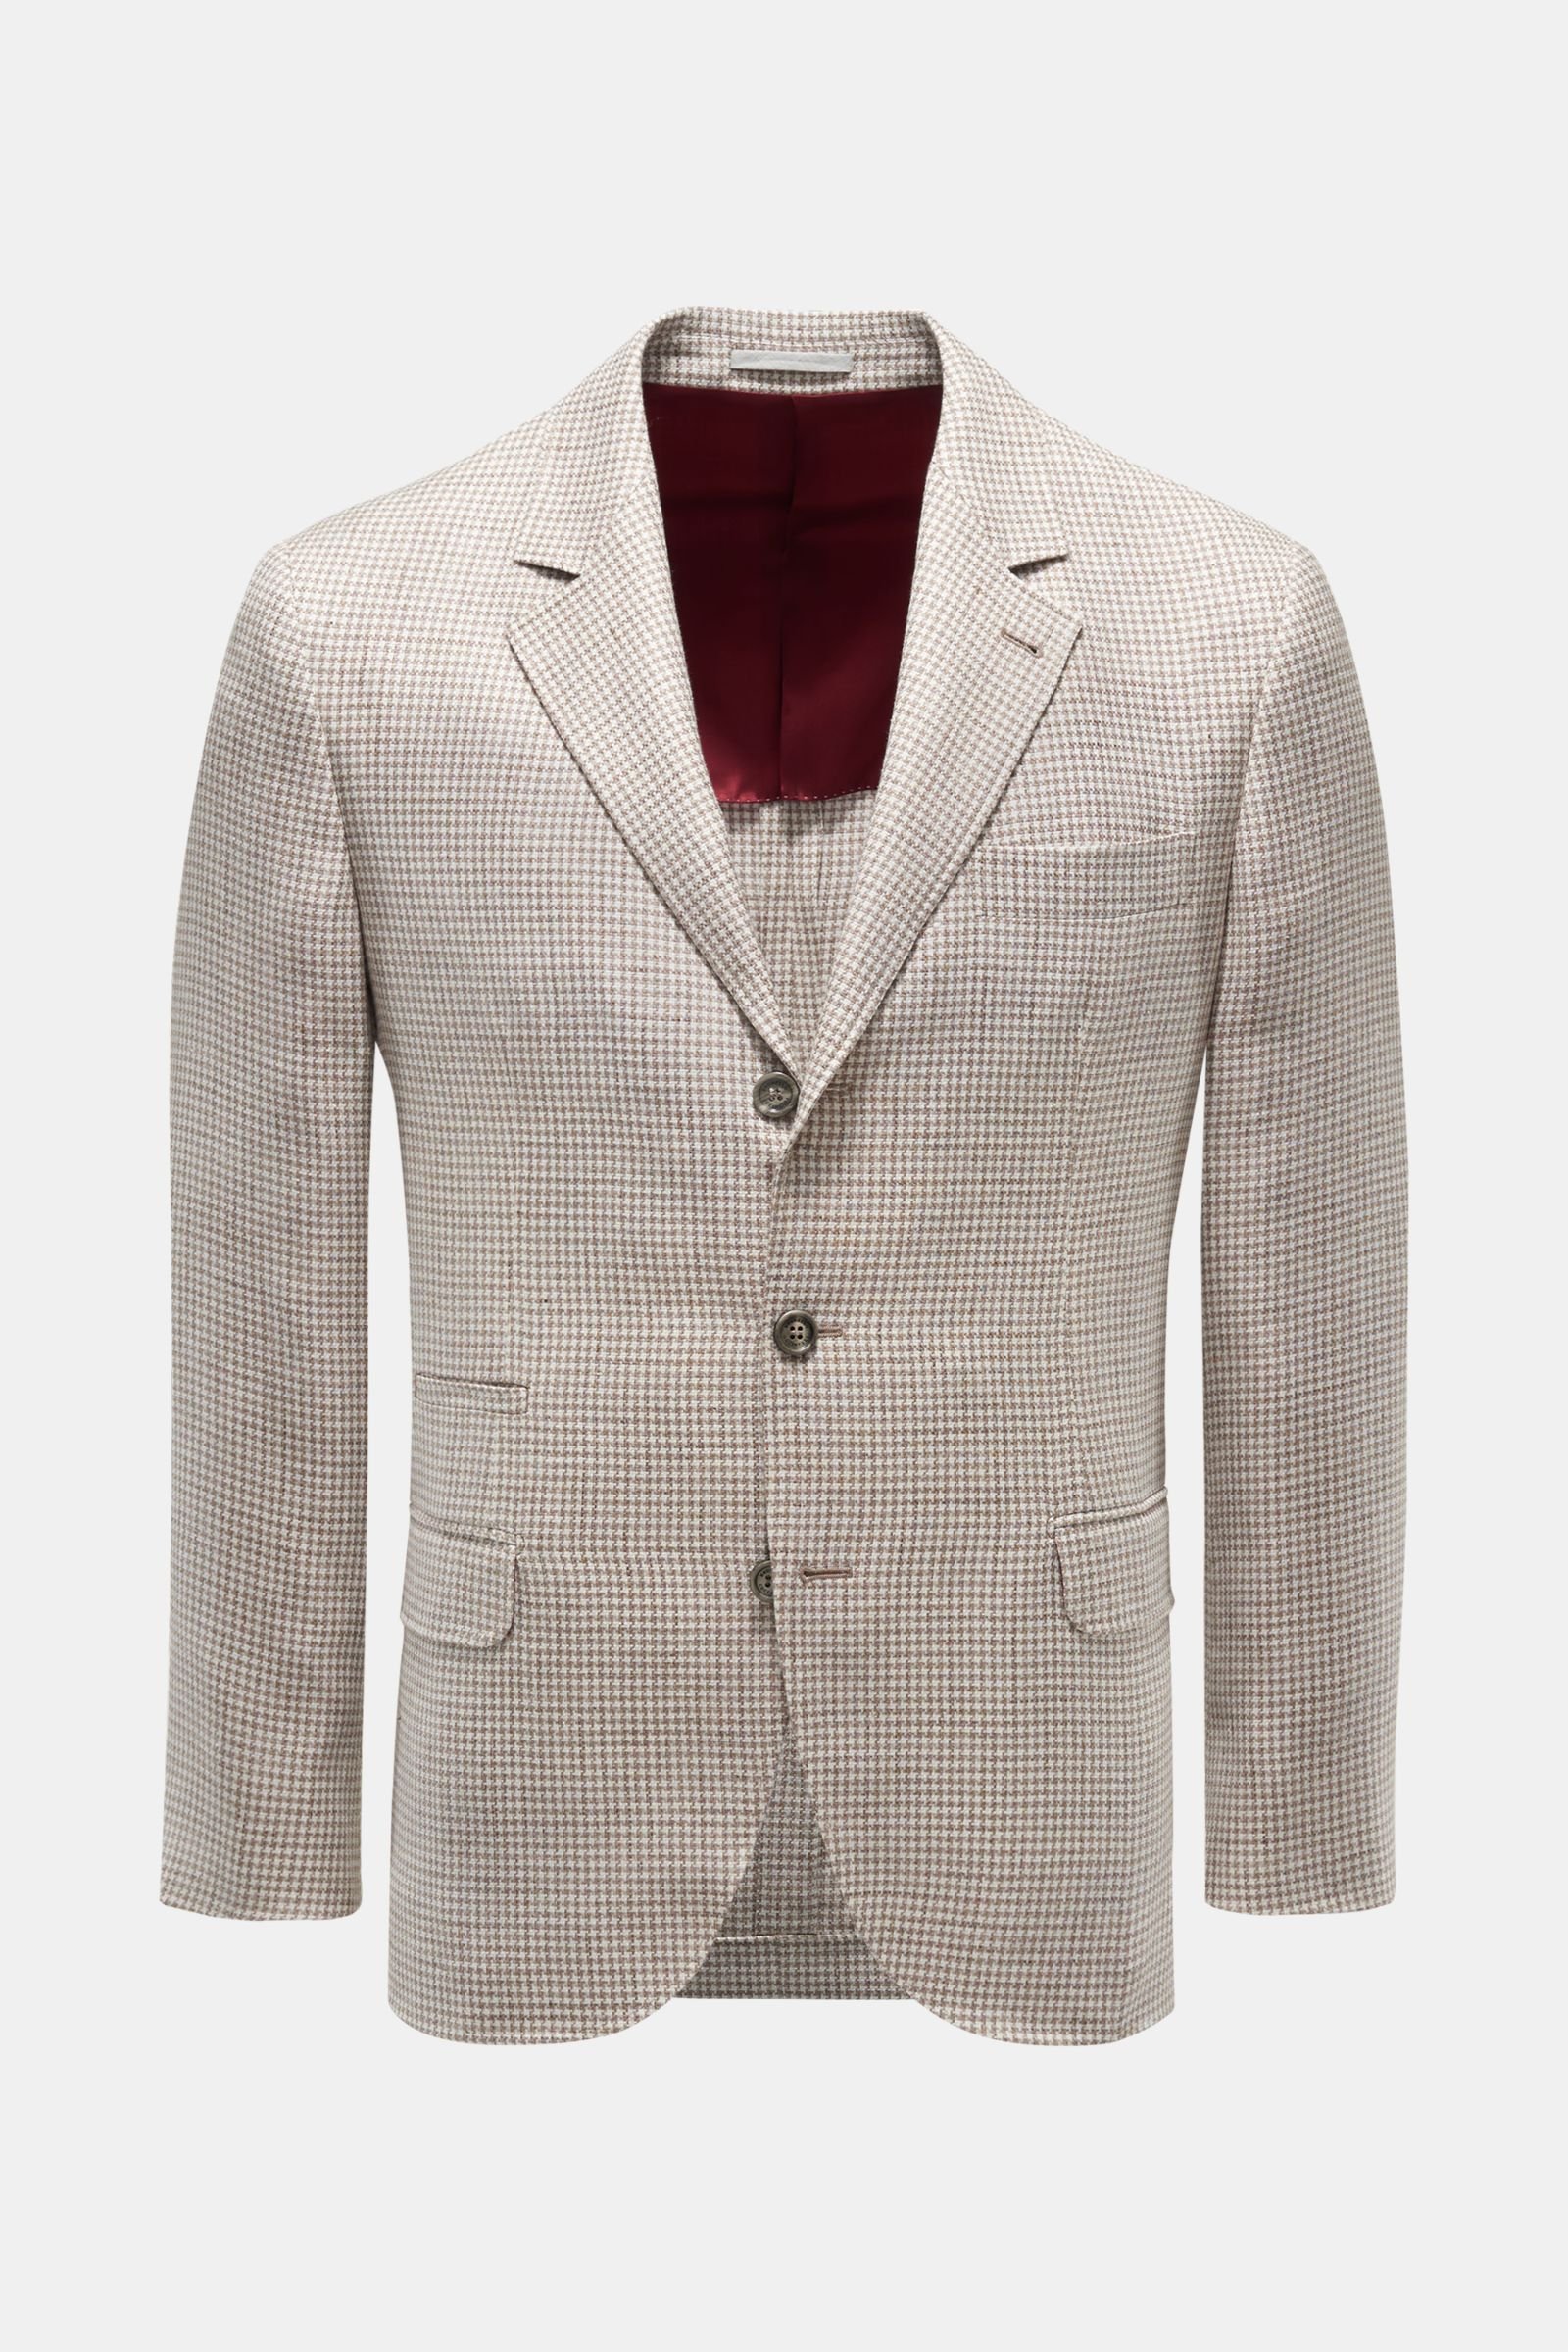 Smart-casual jacket beige/grey-brown checked